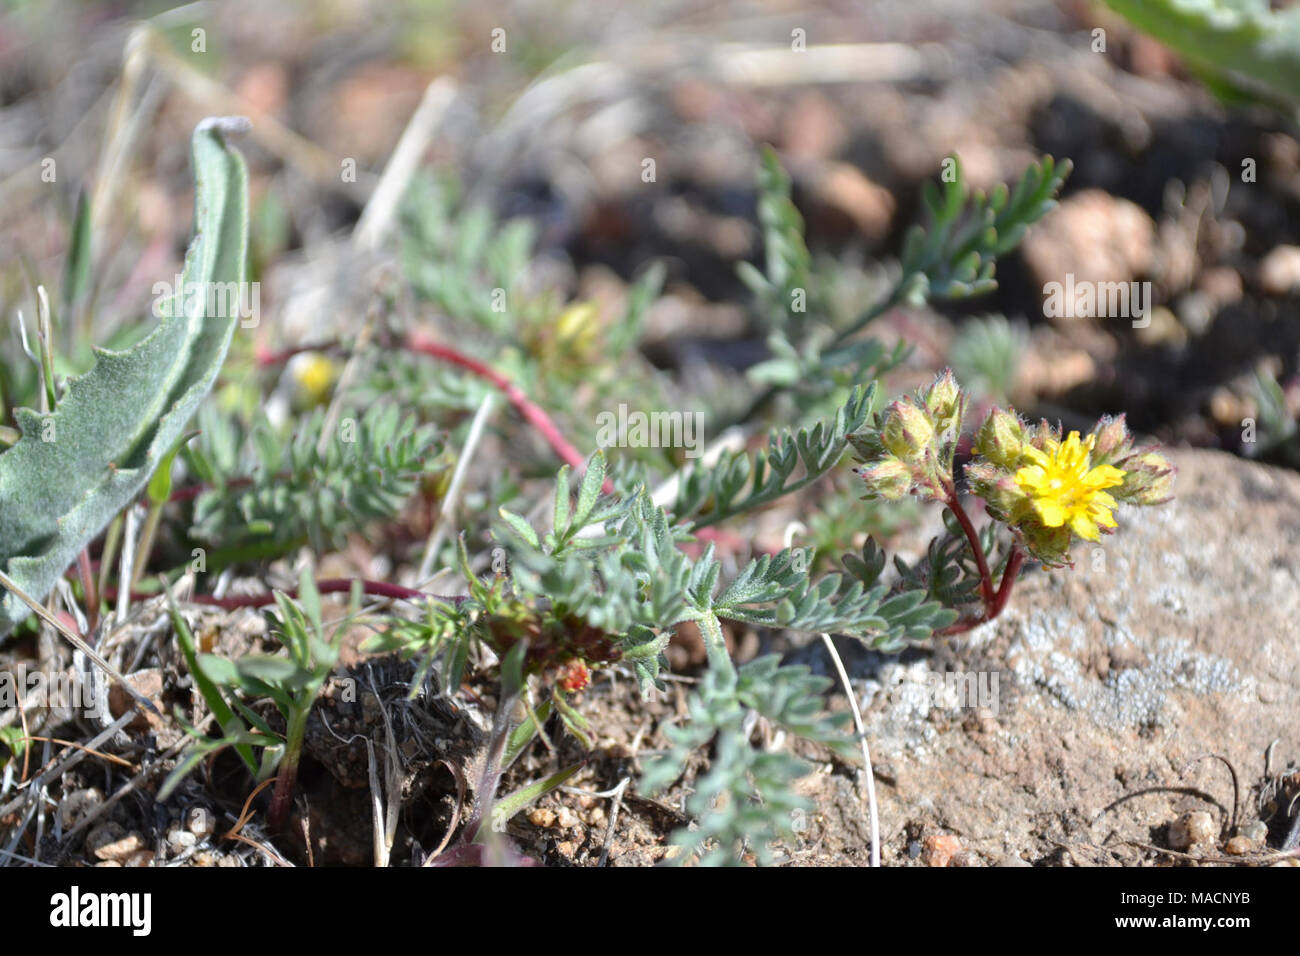 Webber's ivesia. Webber's ivesia populations are  being threatened by habitat loss and degradation. Stock Photo